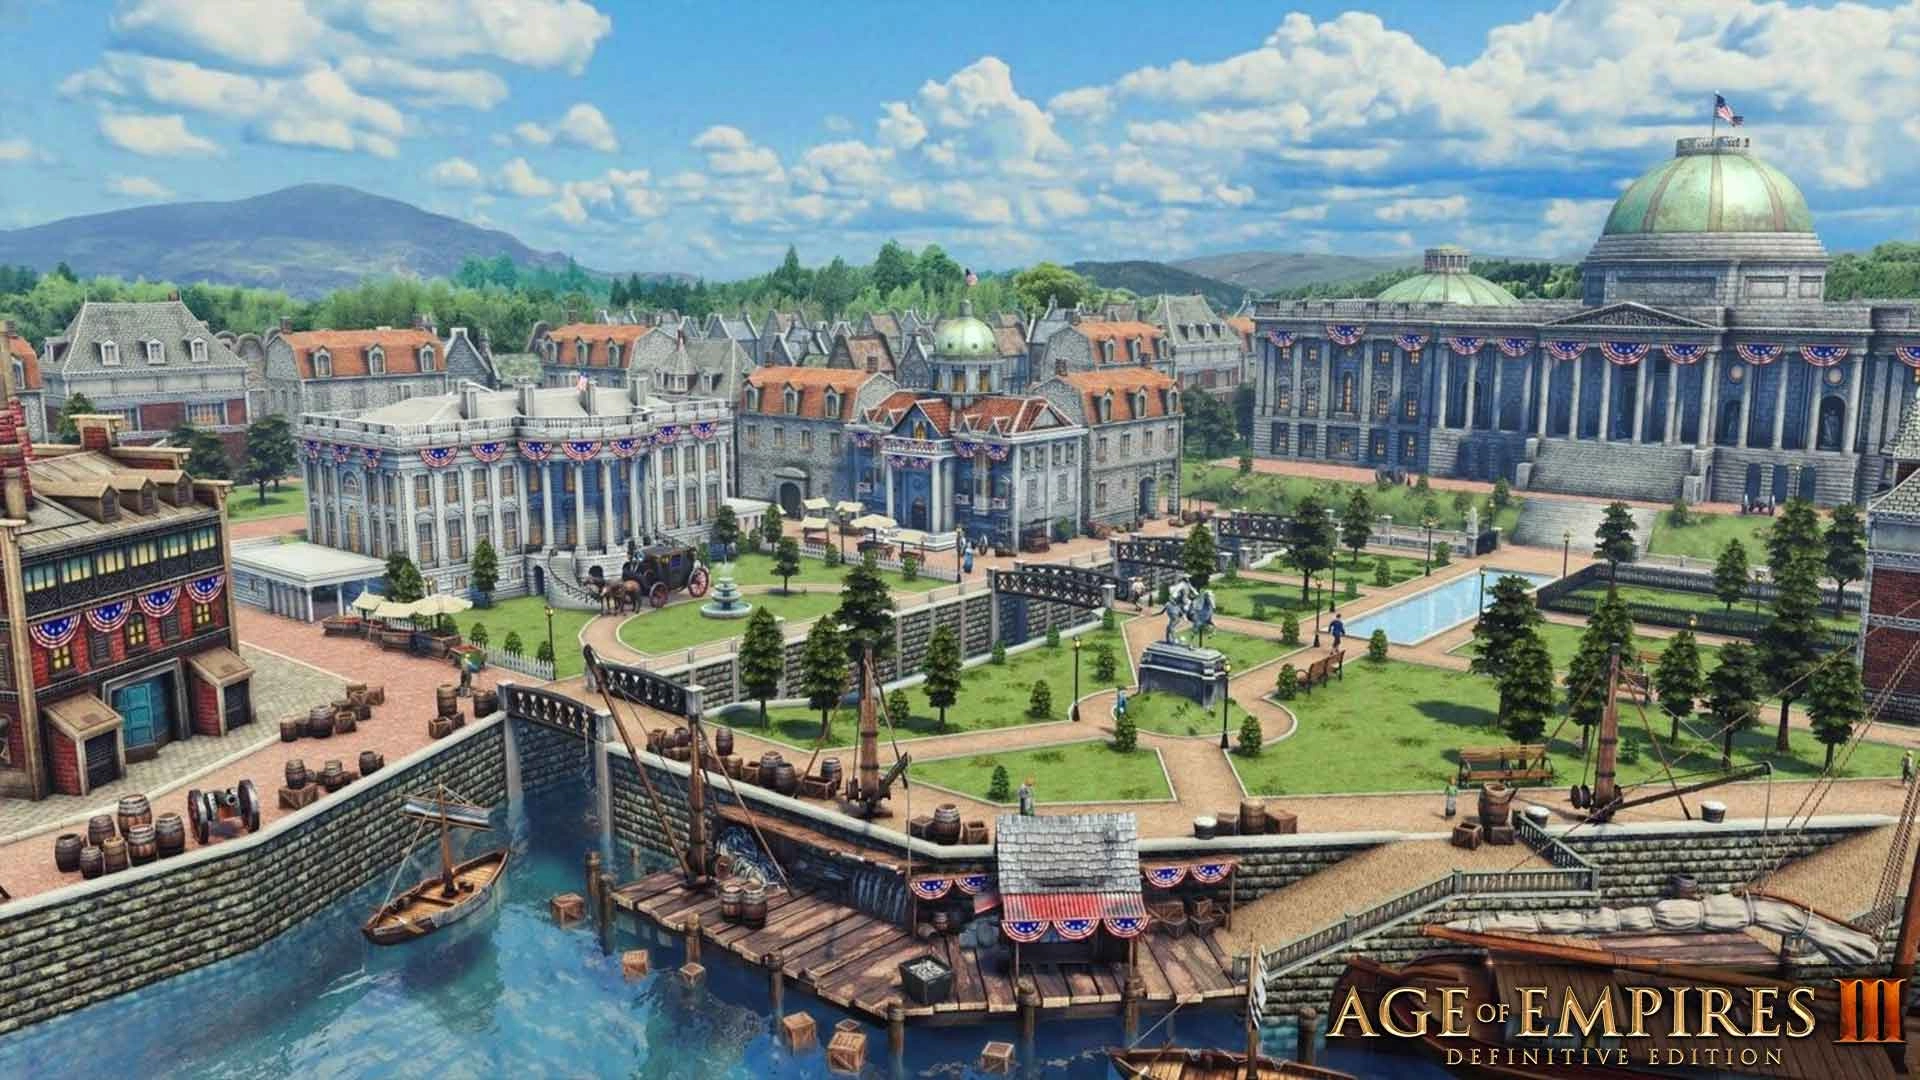 Age of Empires III adds the United States as a civilization